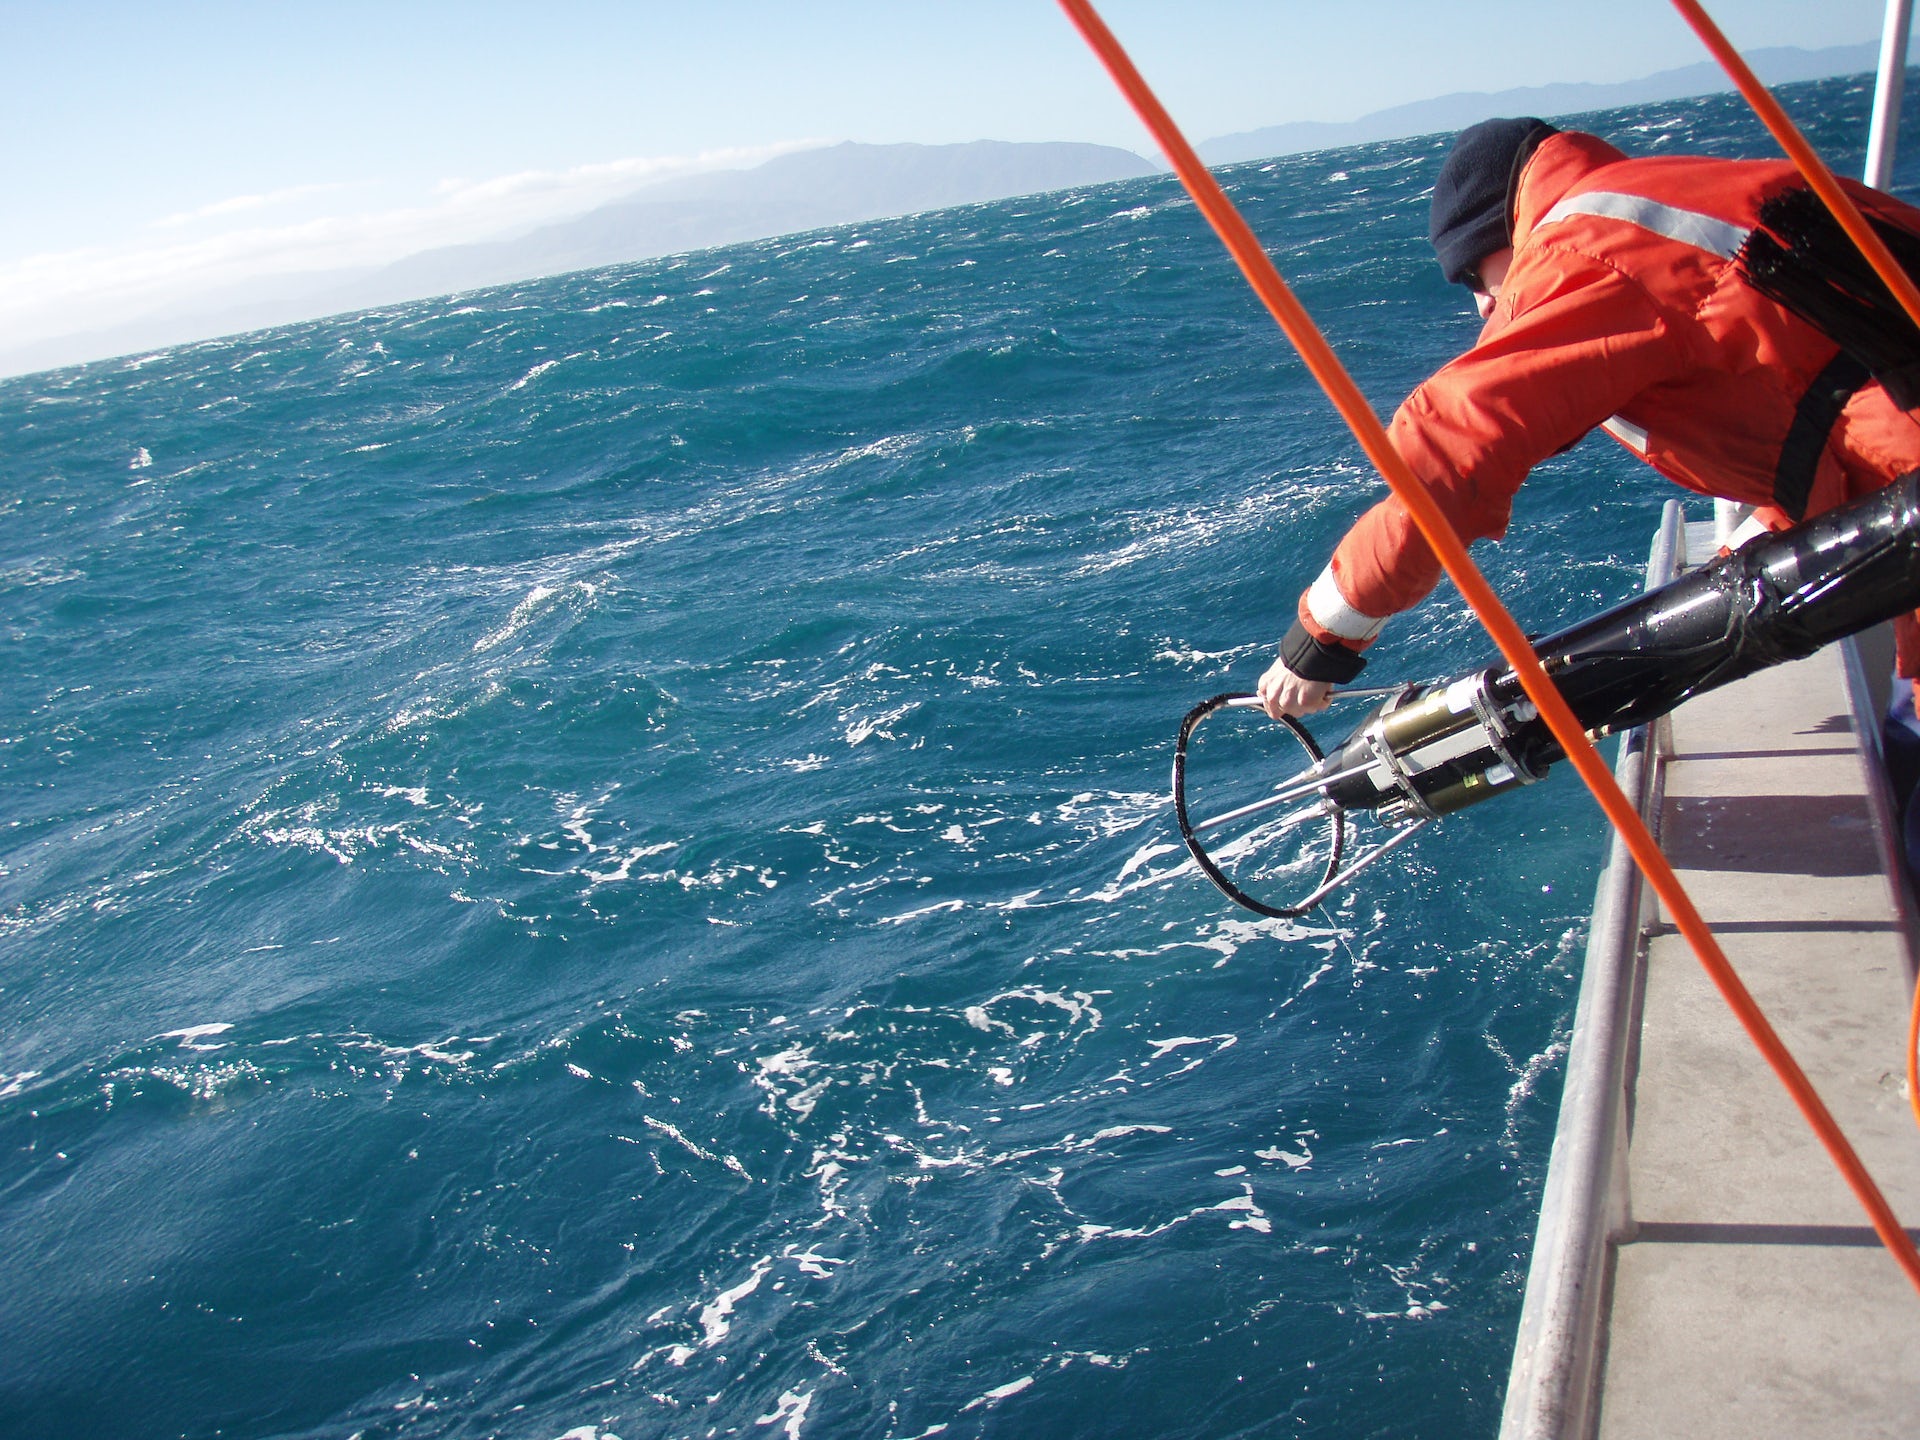 An ocean turbulence sensor being deployed in rough conditions.